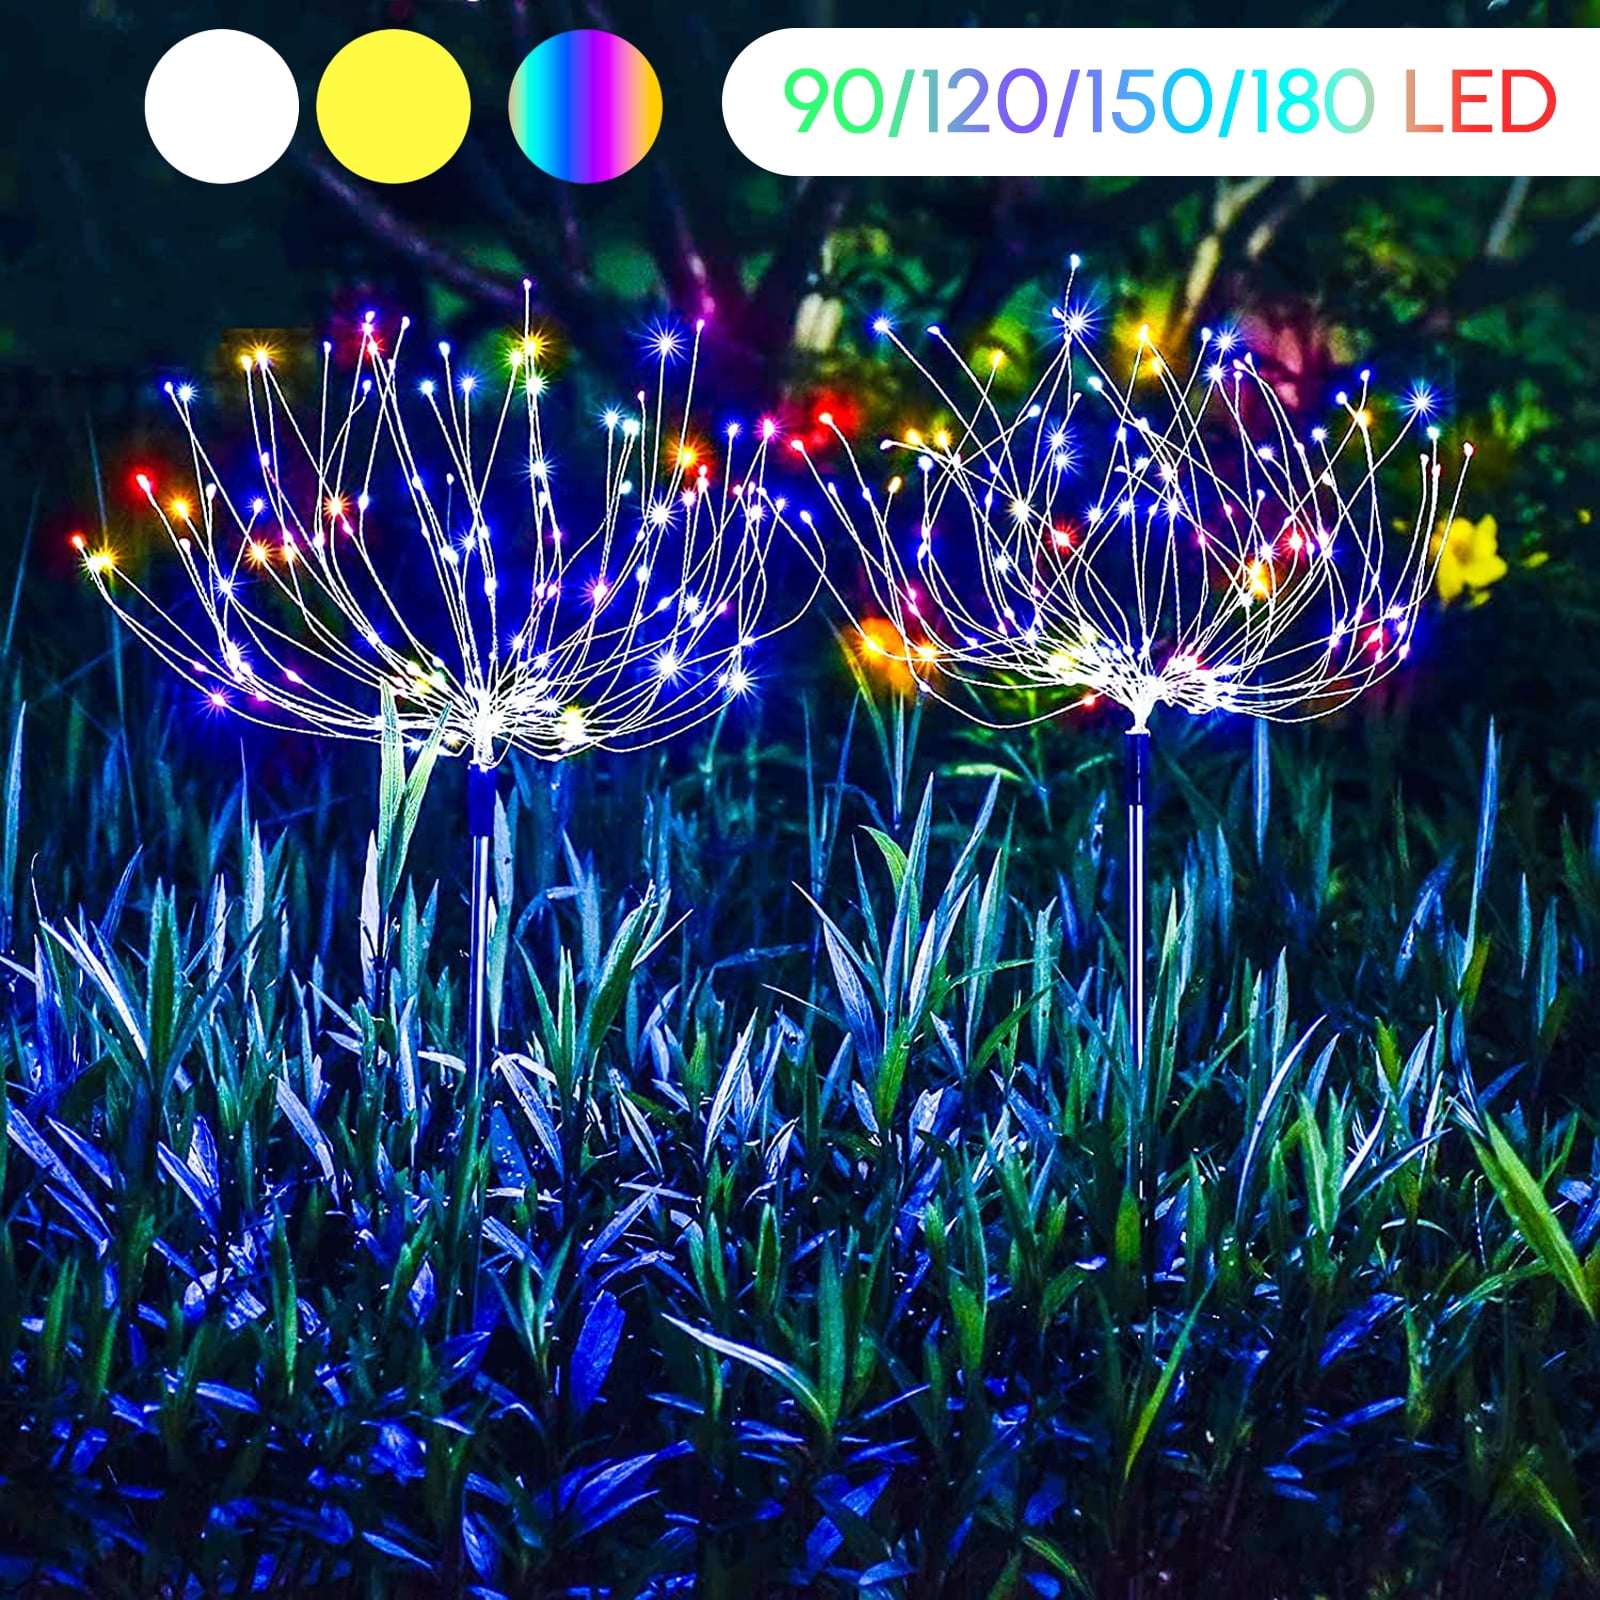 MAGGIFT Pcs Solar Powered LED Garden Lights, Solar Path Lights Outdoor, Automatic Led Halloween Christmas Decorative Landscape Lighting for Patio, Y - 2